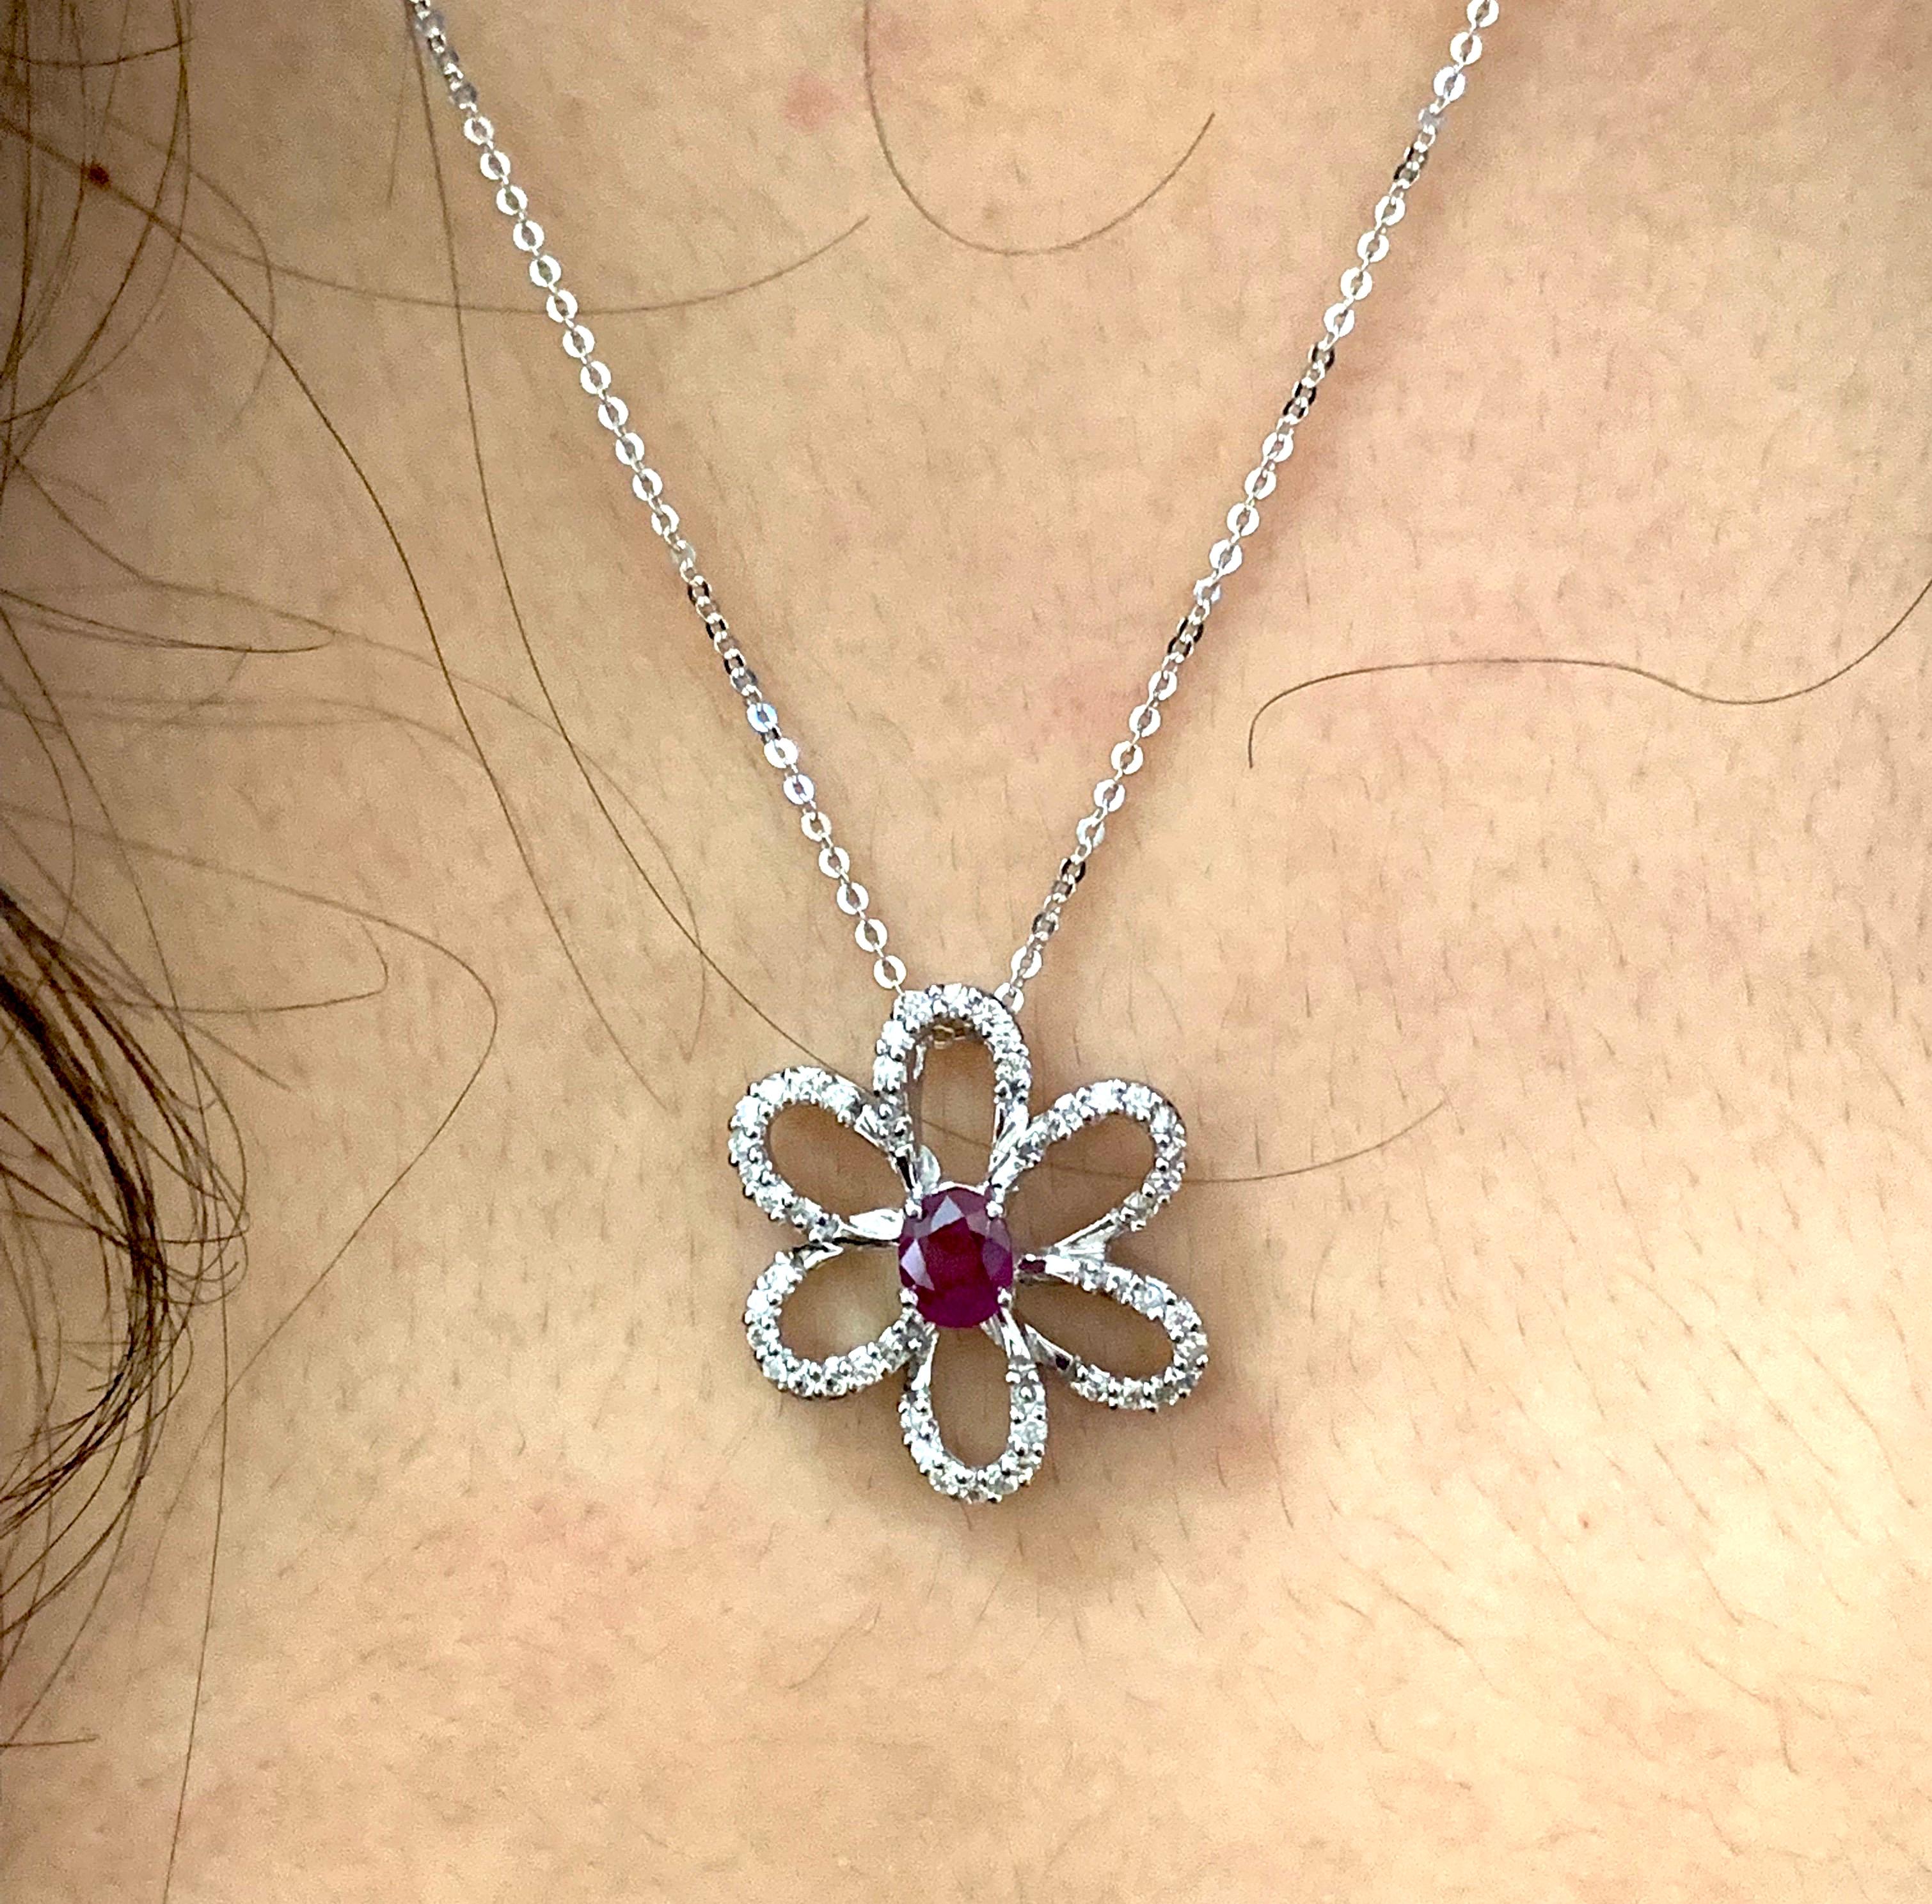 Oval Cut 0.52 Carat Ruby and 0.28 Carat Diamond Flower Necklace